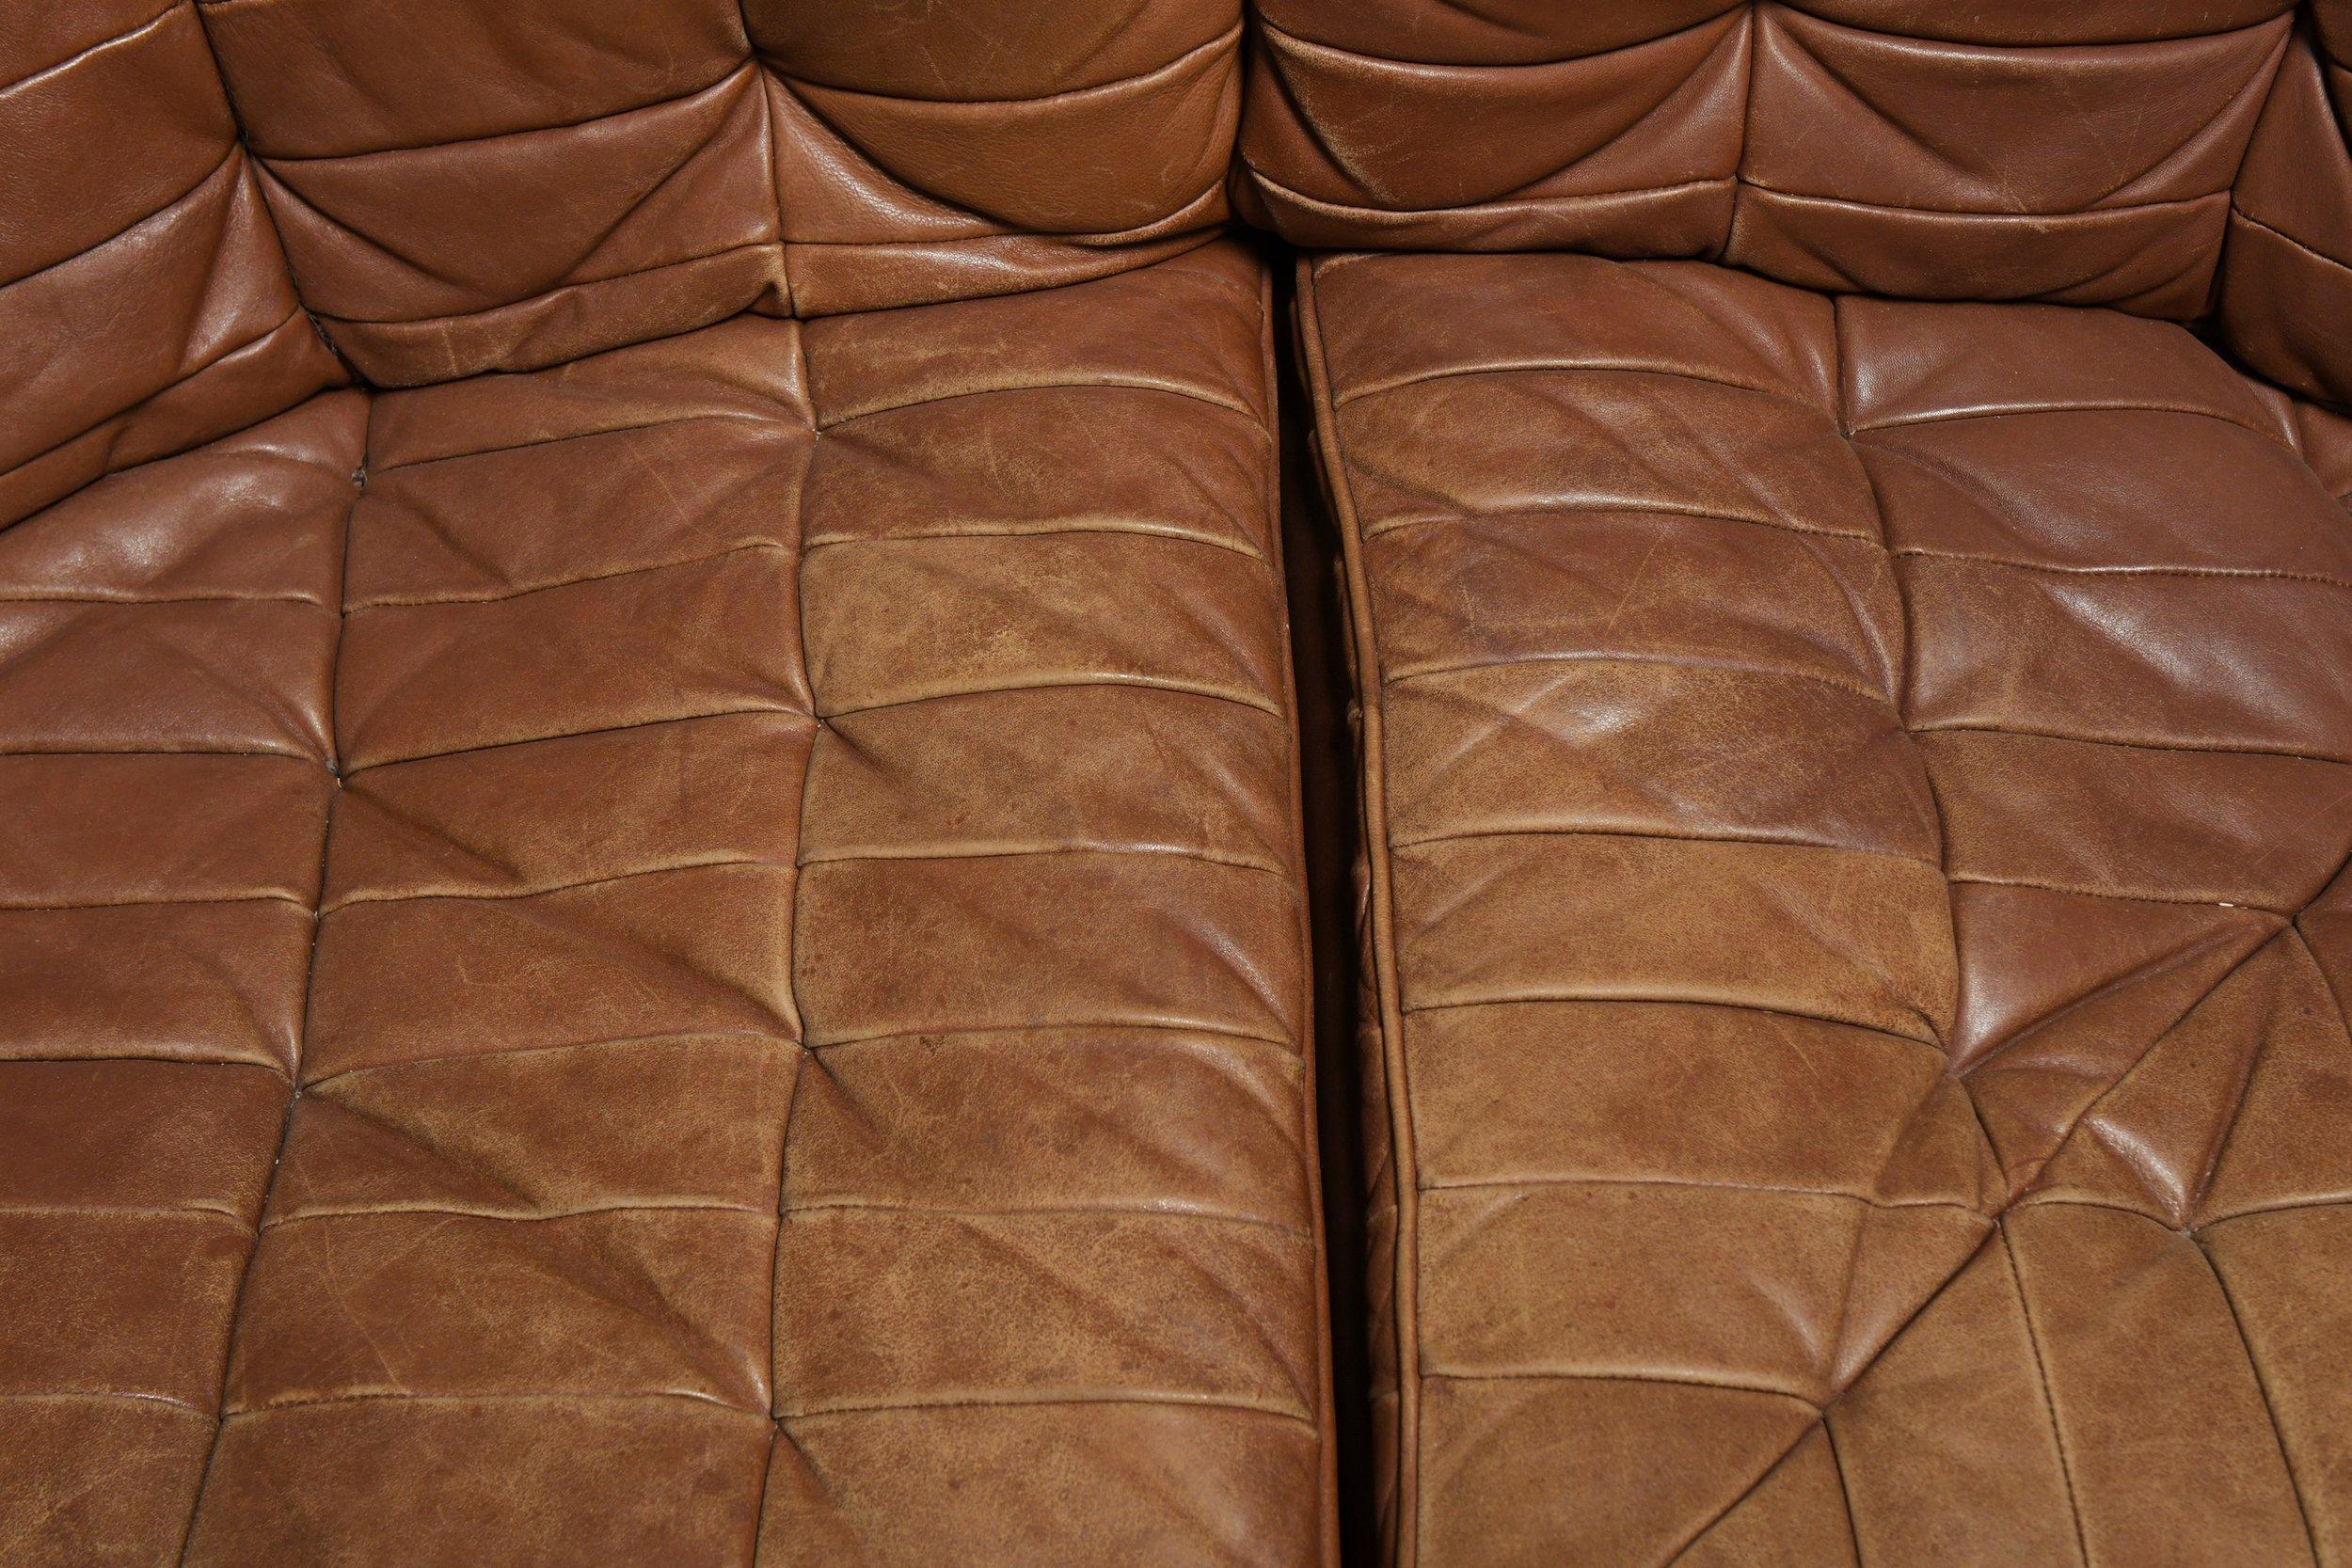 Swiss De Sede DS11 Patchwork Leather Sectional in Caramel, Circa 1970s For Sale